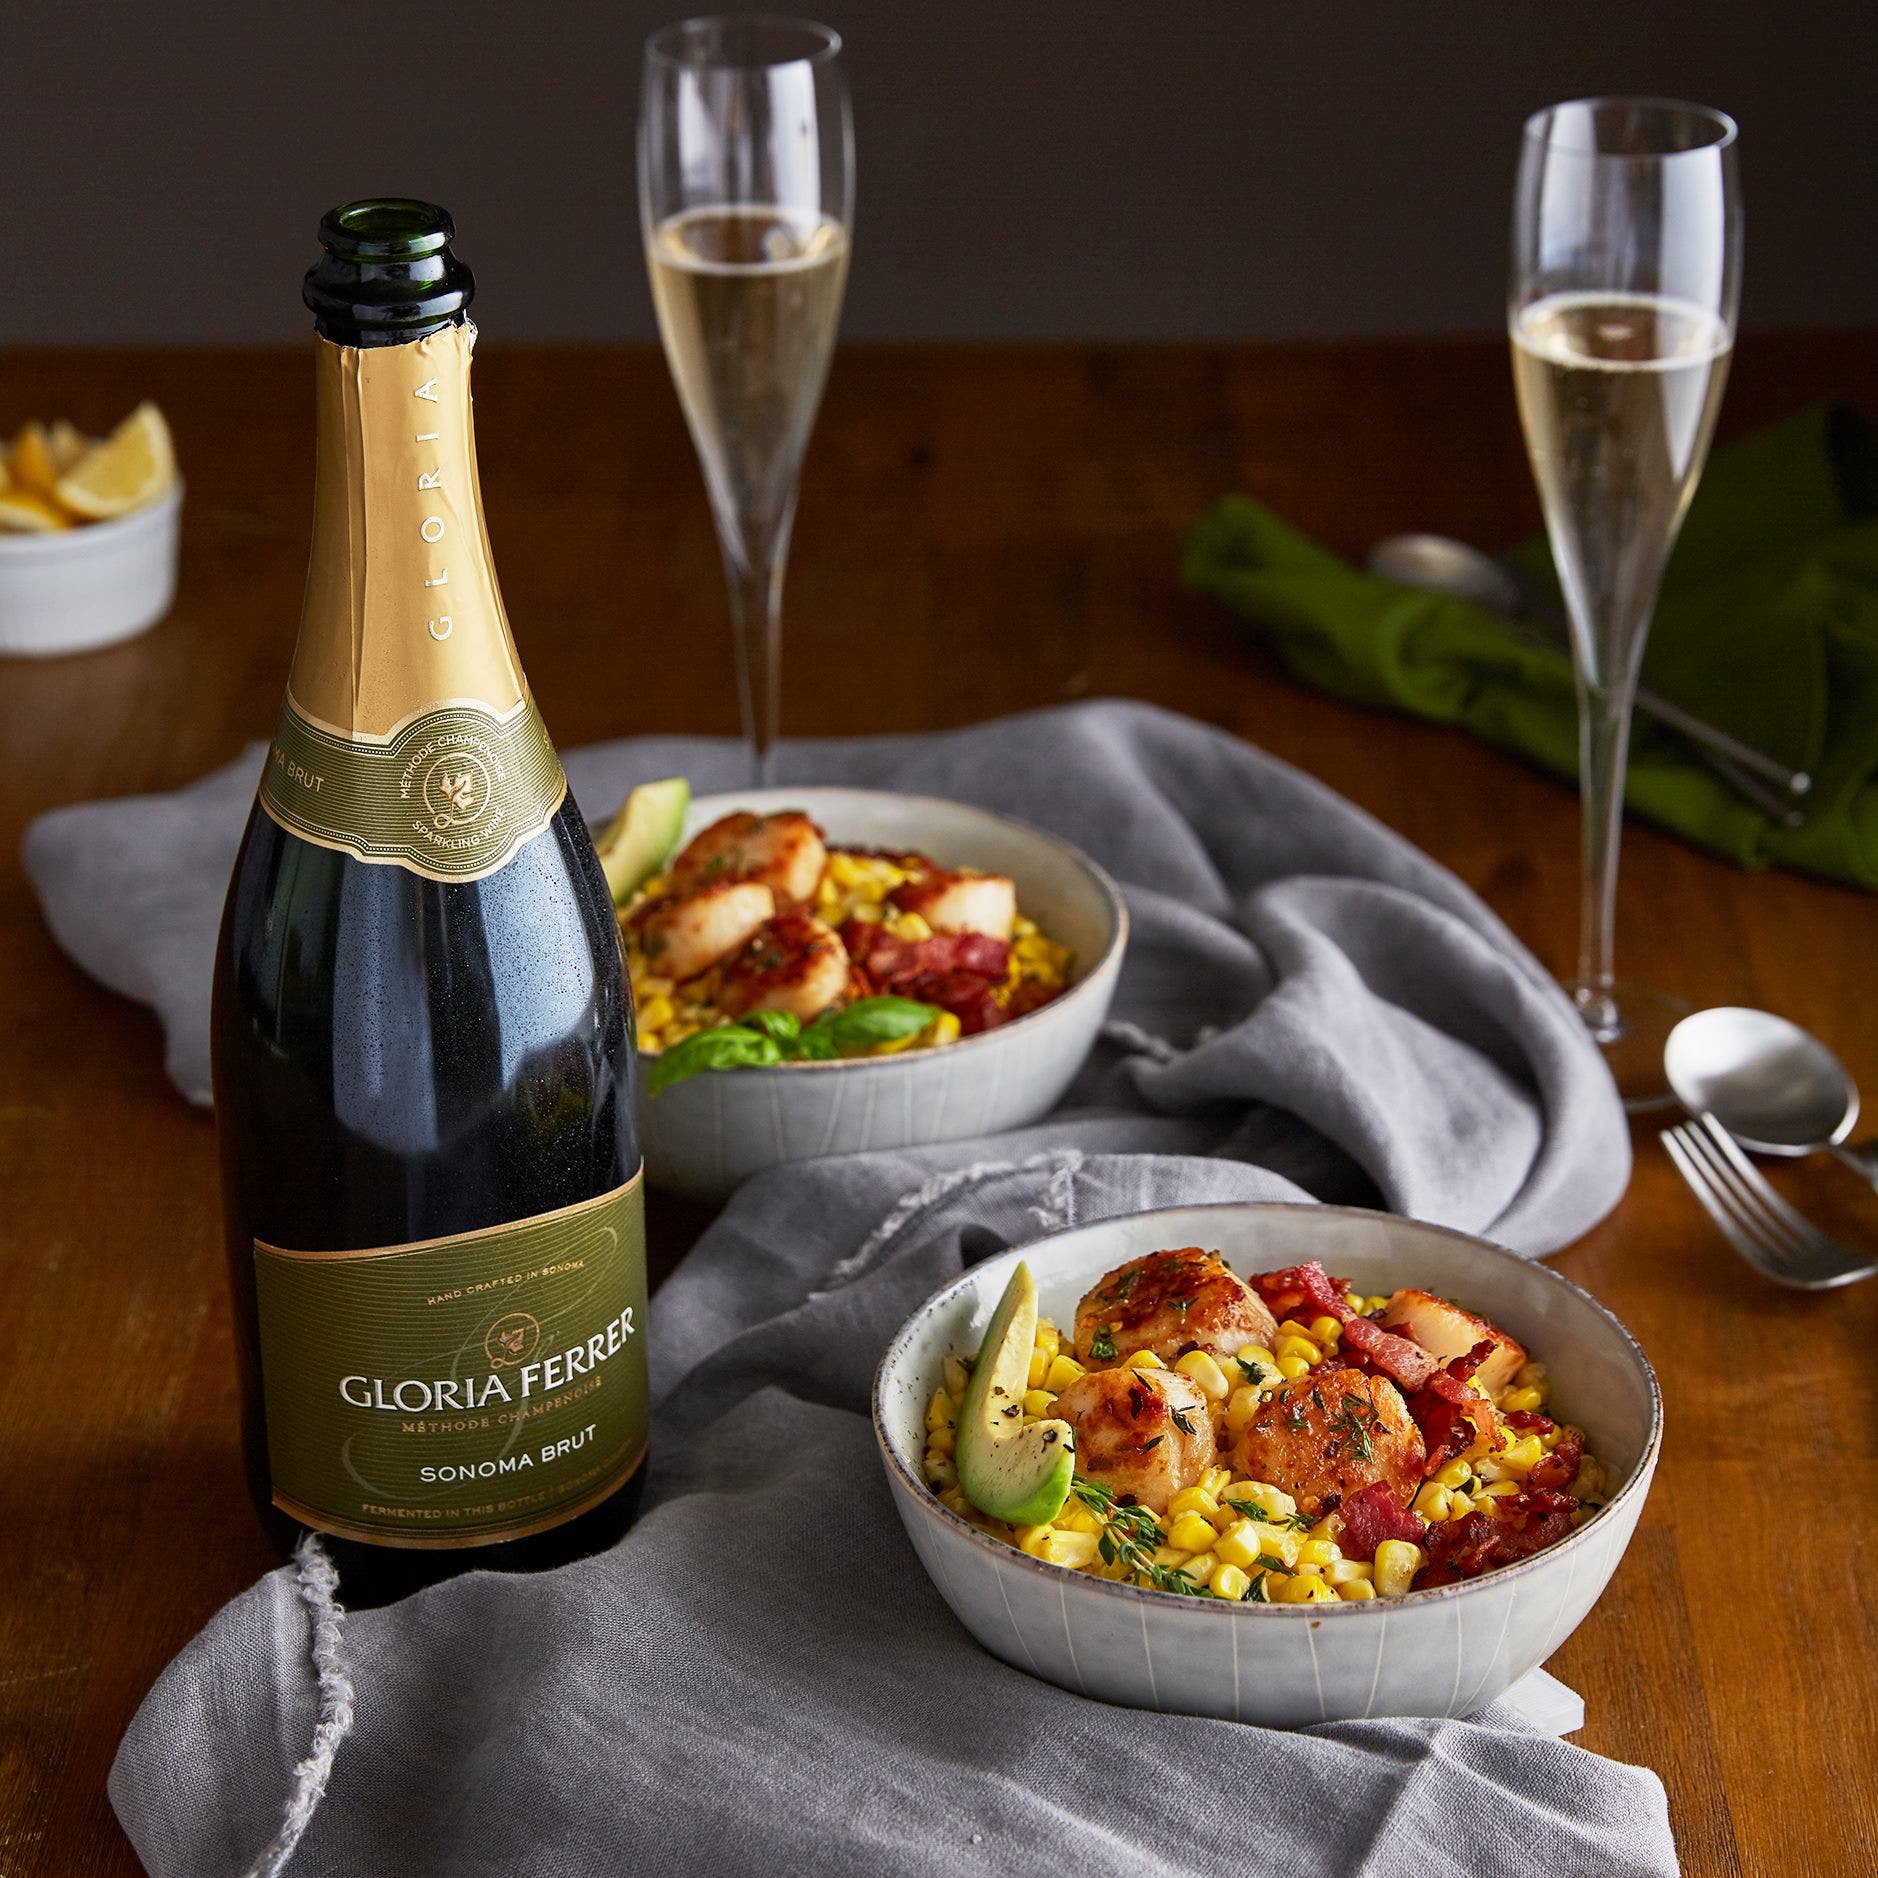 Gloria Ferrer Sonoma Brut & Brown Butter Scallop Salads with Corn, Bacon, and Avocado Salad